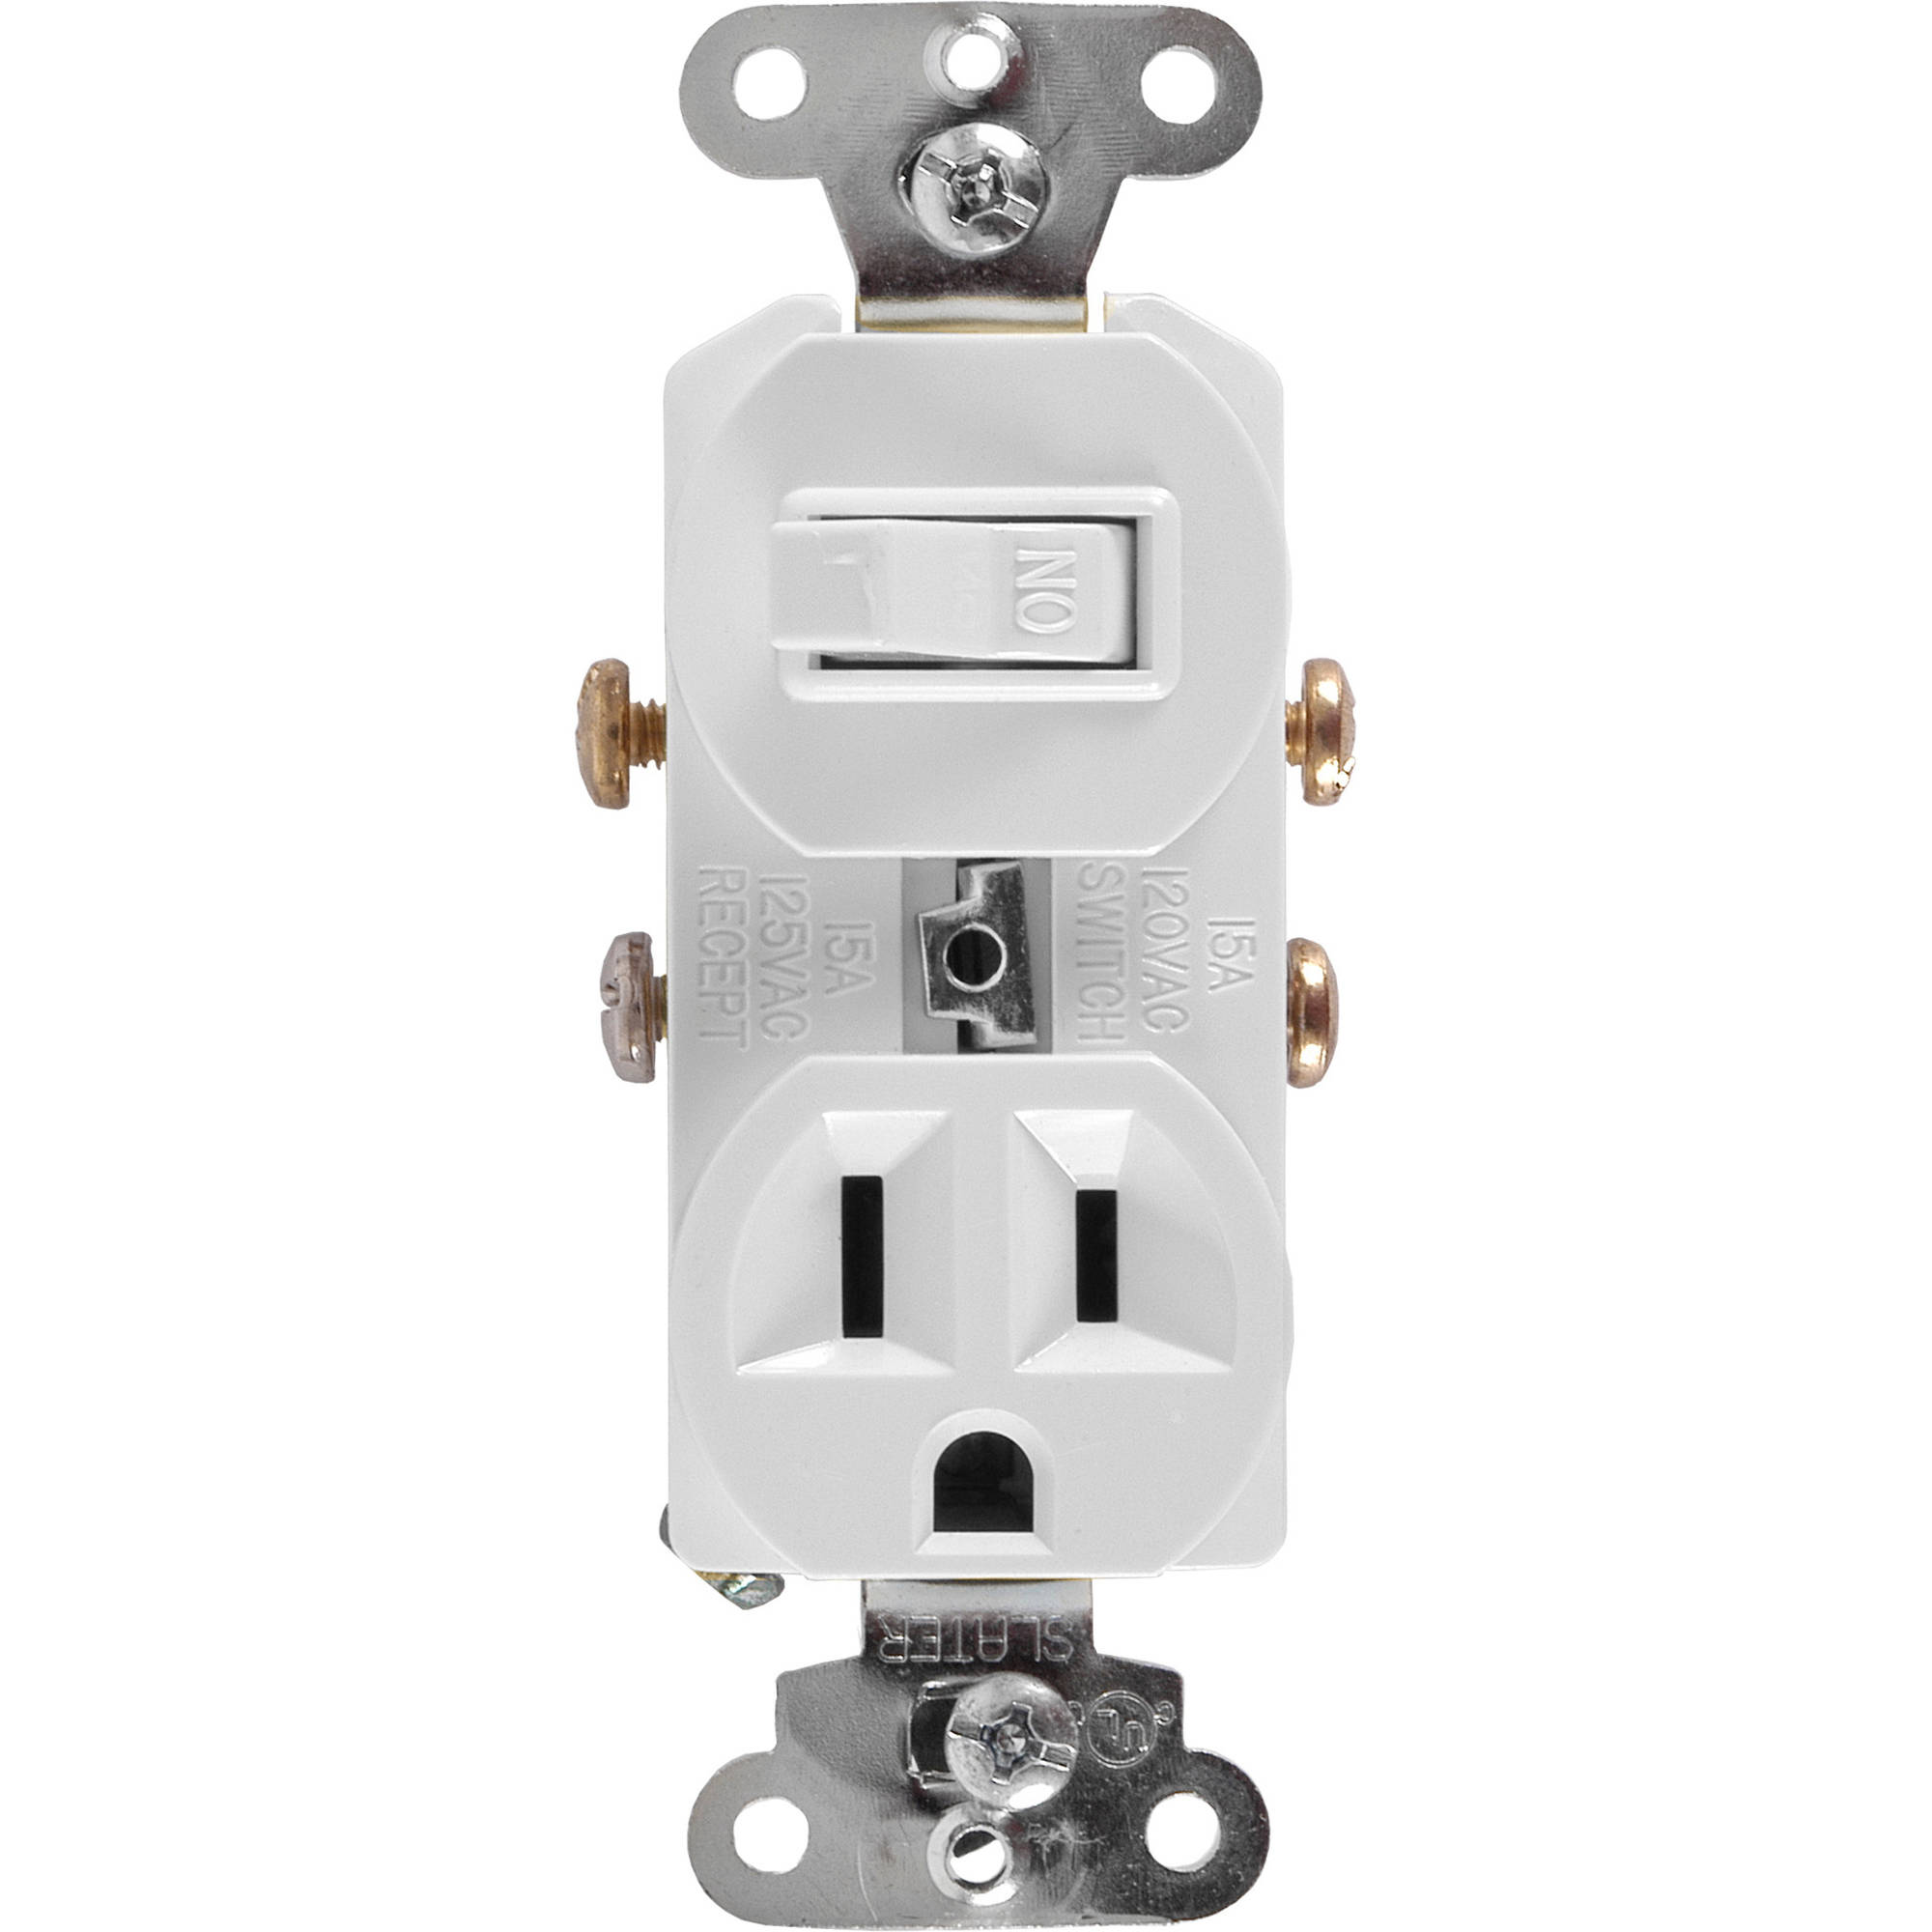 GE Wall Switch Outlet - 59797 - image 1 of 6